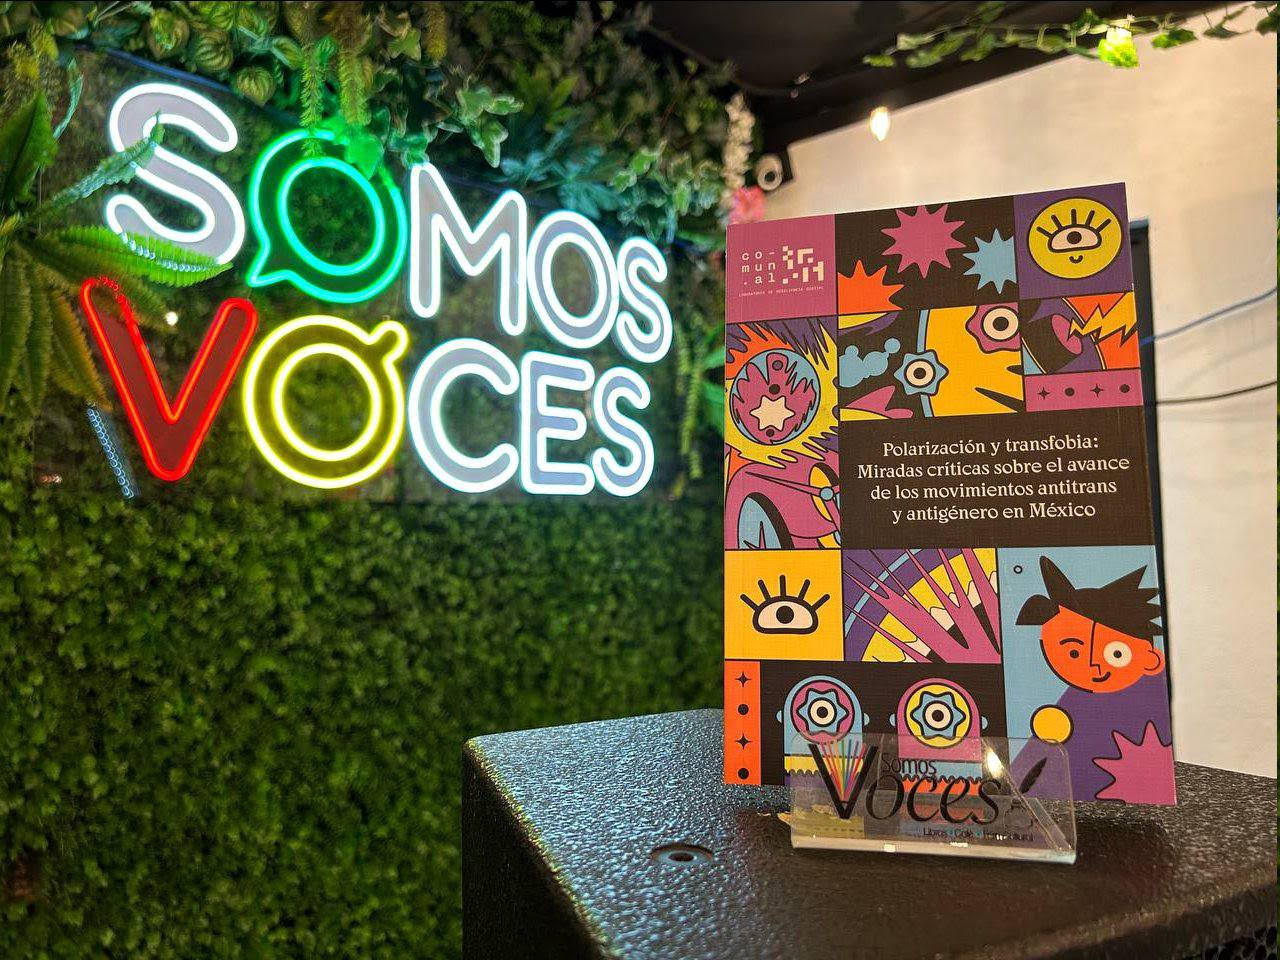 Neon sign that reads "Somos Voces" and a book on the right with bright colors on the cover